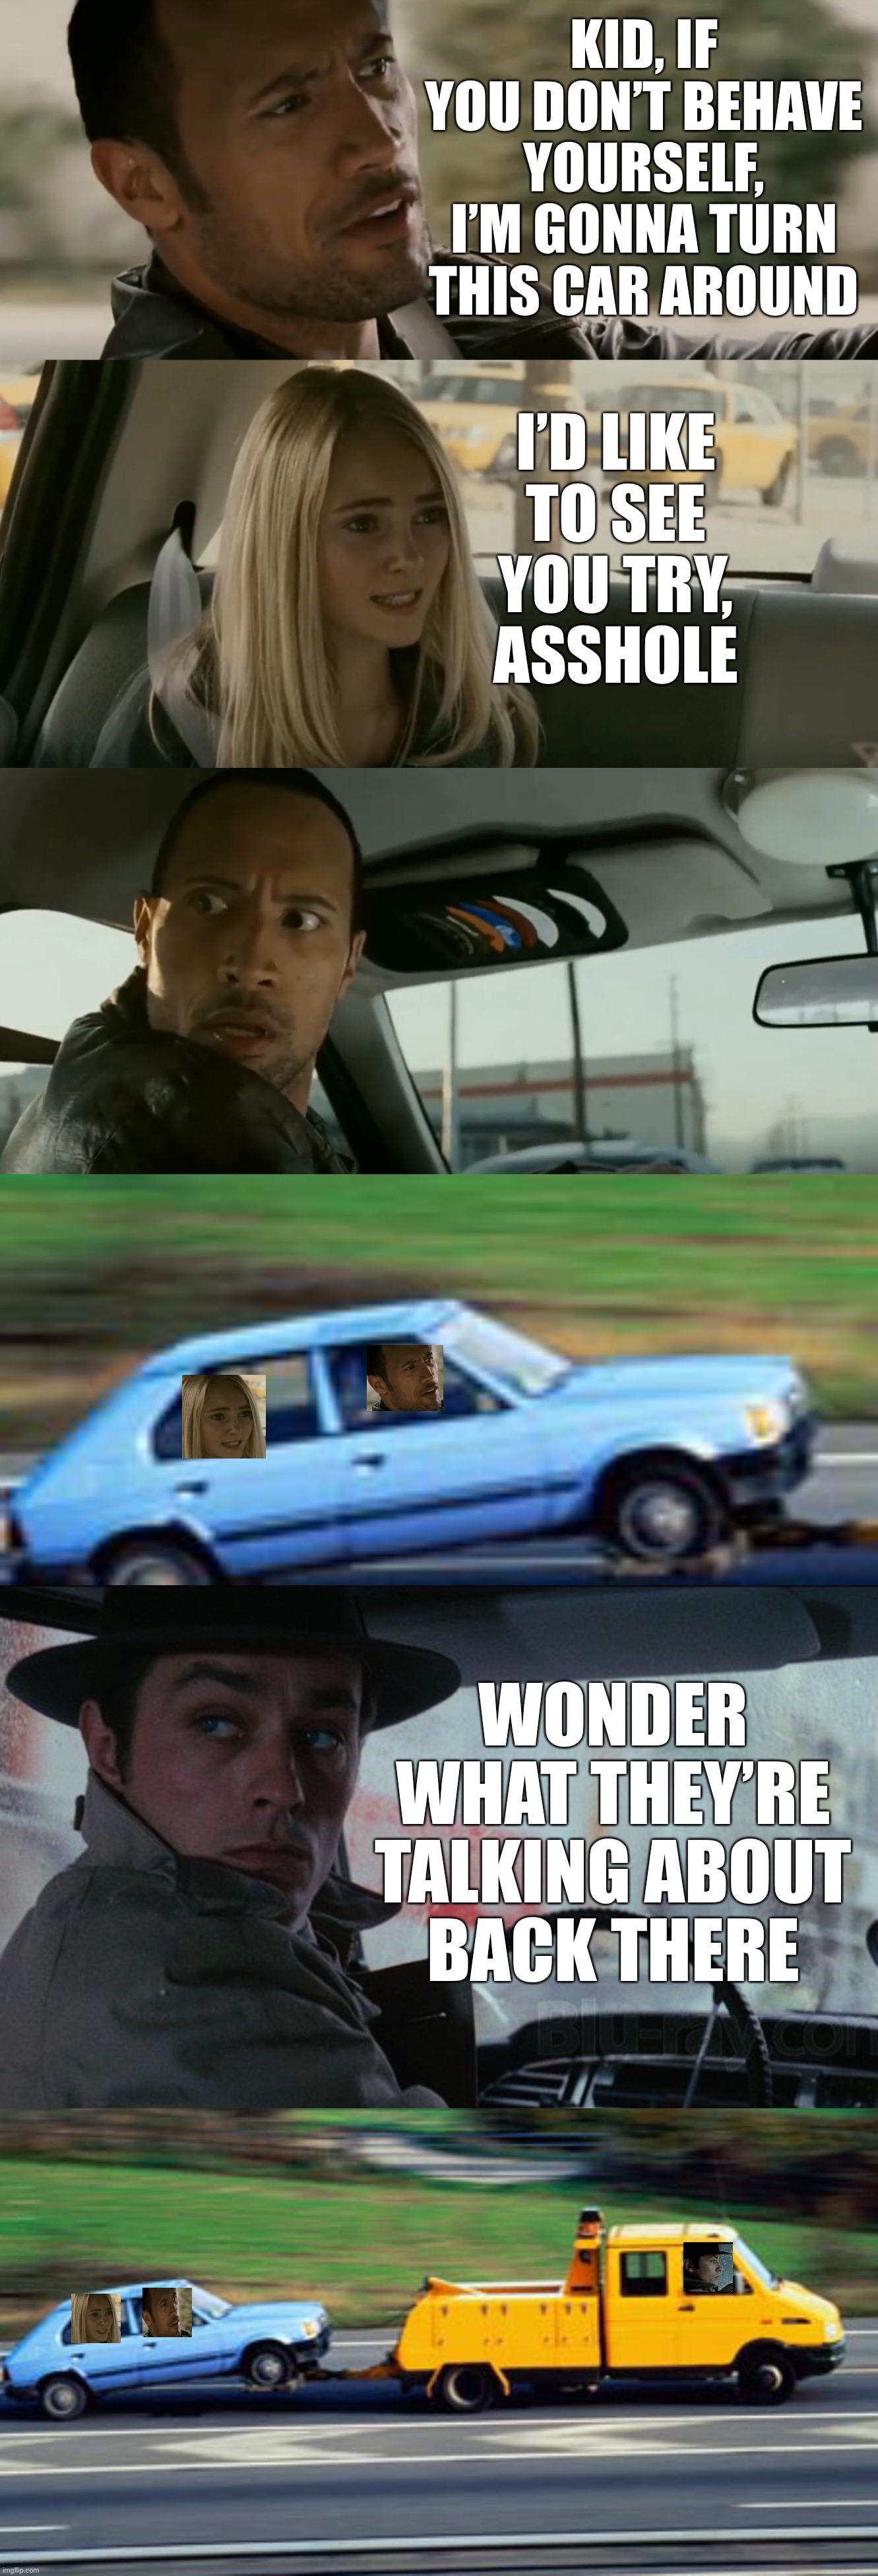 KID, IF YOU DON’T BEHAVE YOURSELF, I’M GONNA TURN THIS CAR AROUND; I’D LIKE
TO SEE
YOU TRY,
ASSHOLE; WONDER WHAT THEY’RE TALKING ABOUT
BACK THERE | image tagged in memes | made w/ Imgflip meme maker